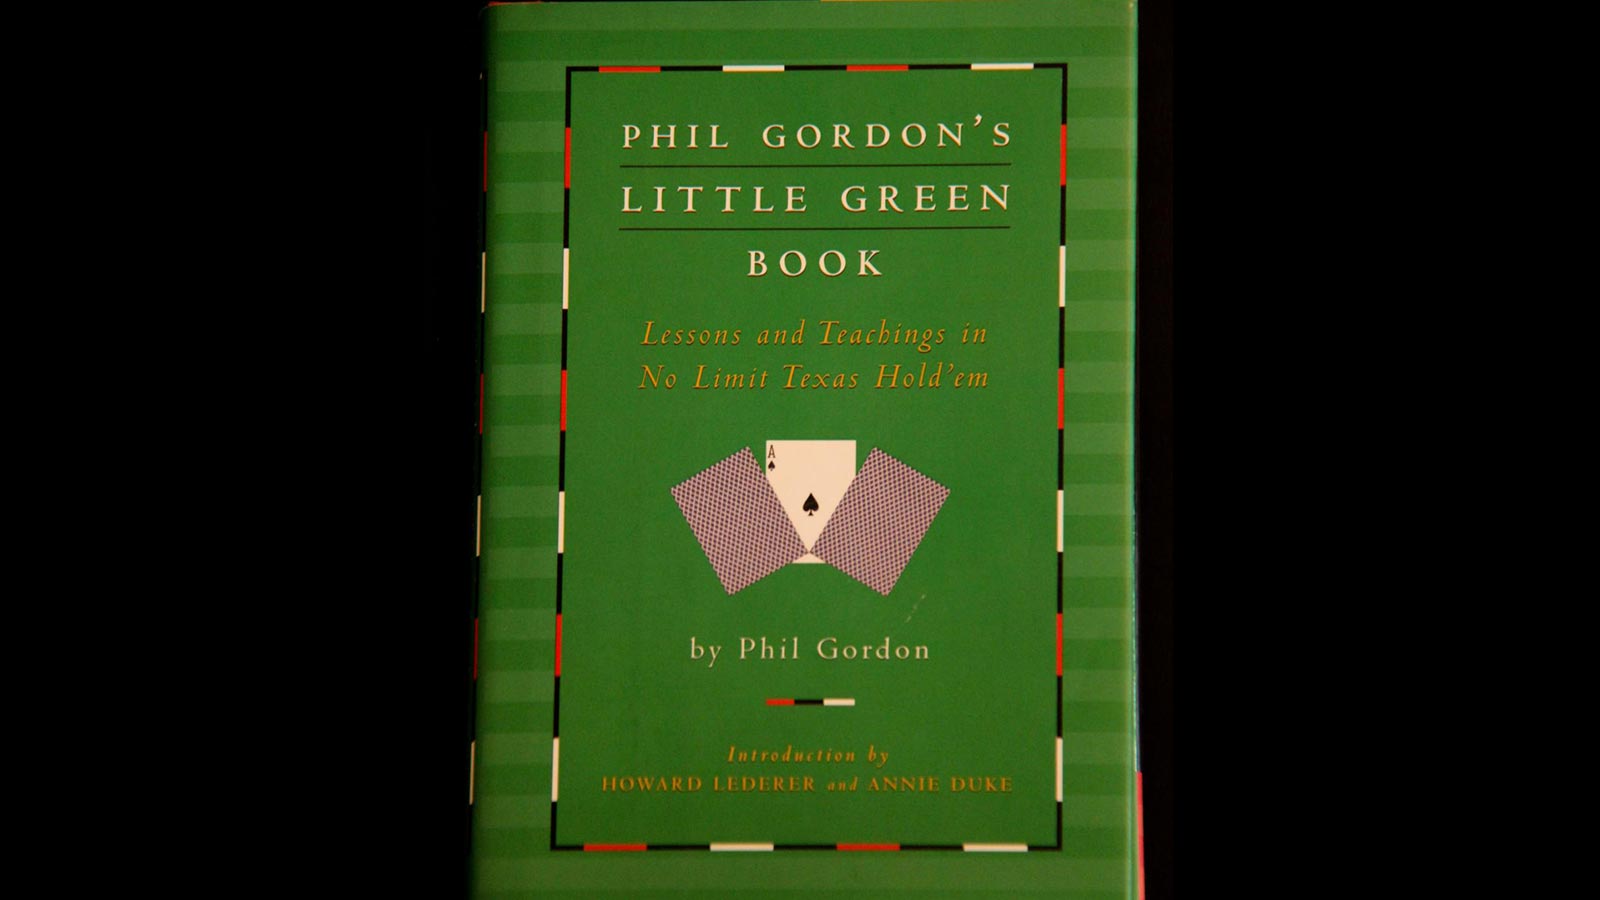 Phil Gordon's Little Green Book Lessons and Teachings in No-Limit Texas Hold'em